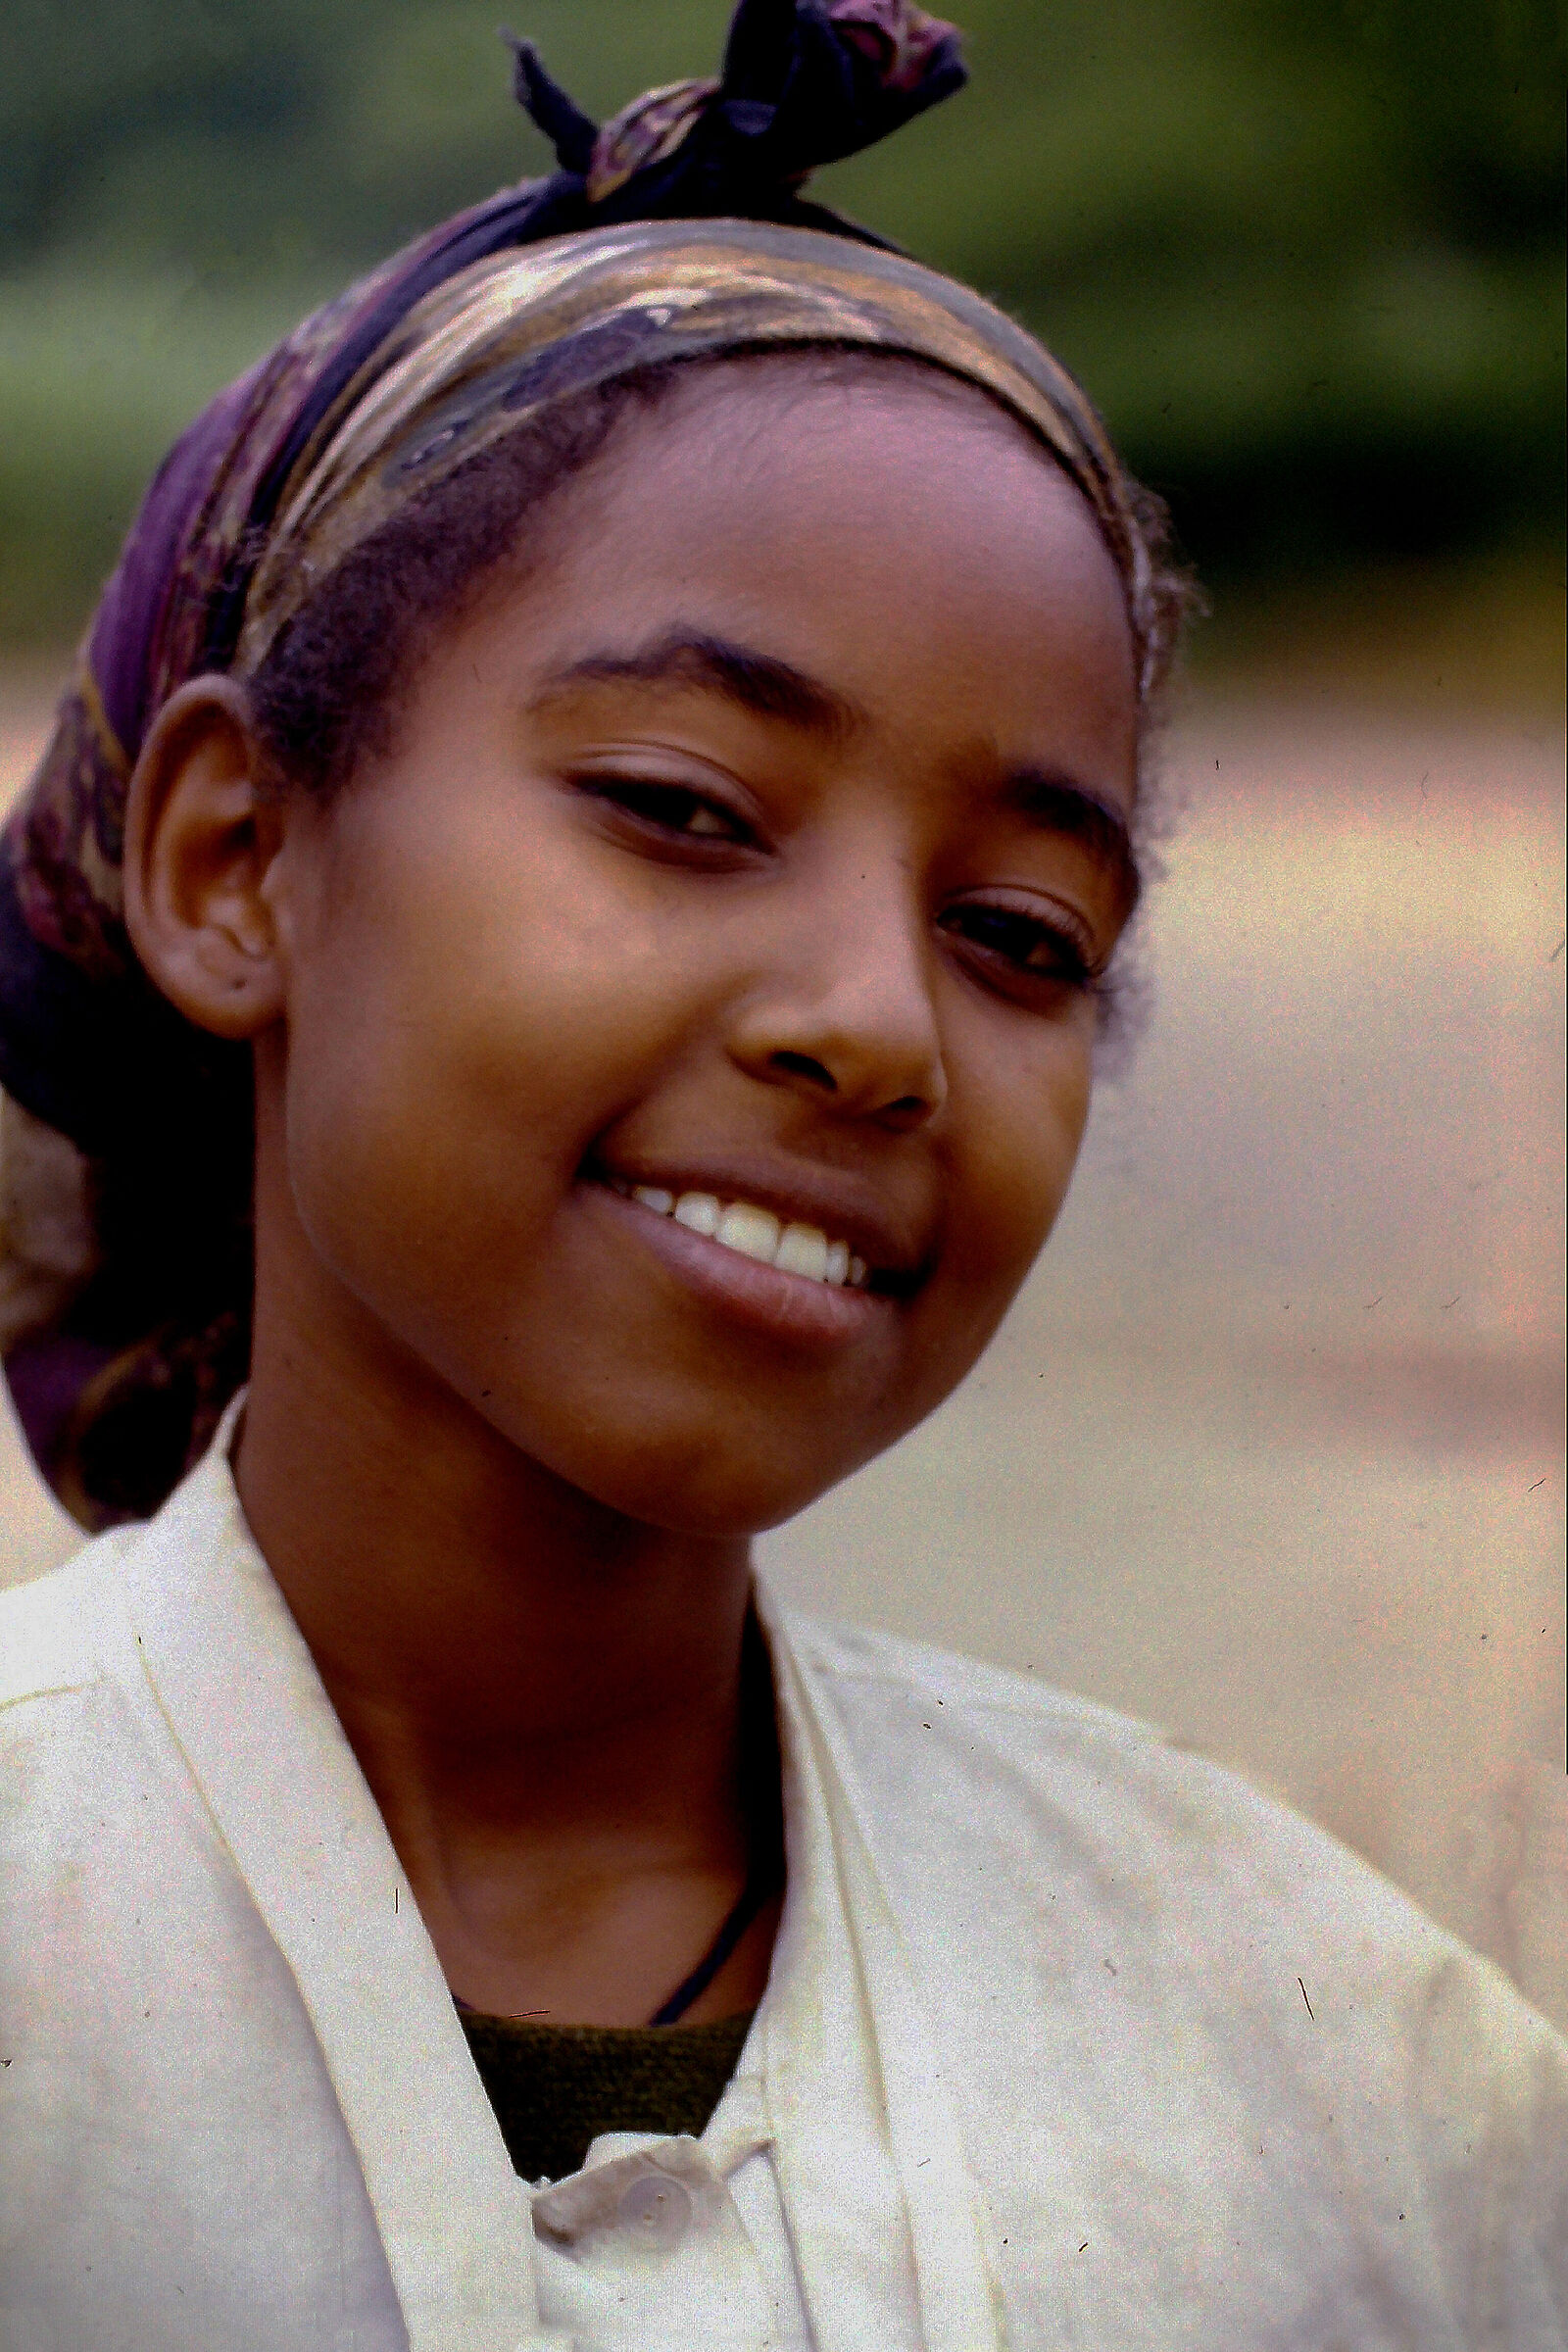 Ethiopia 1998- A new flower has blossomed...